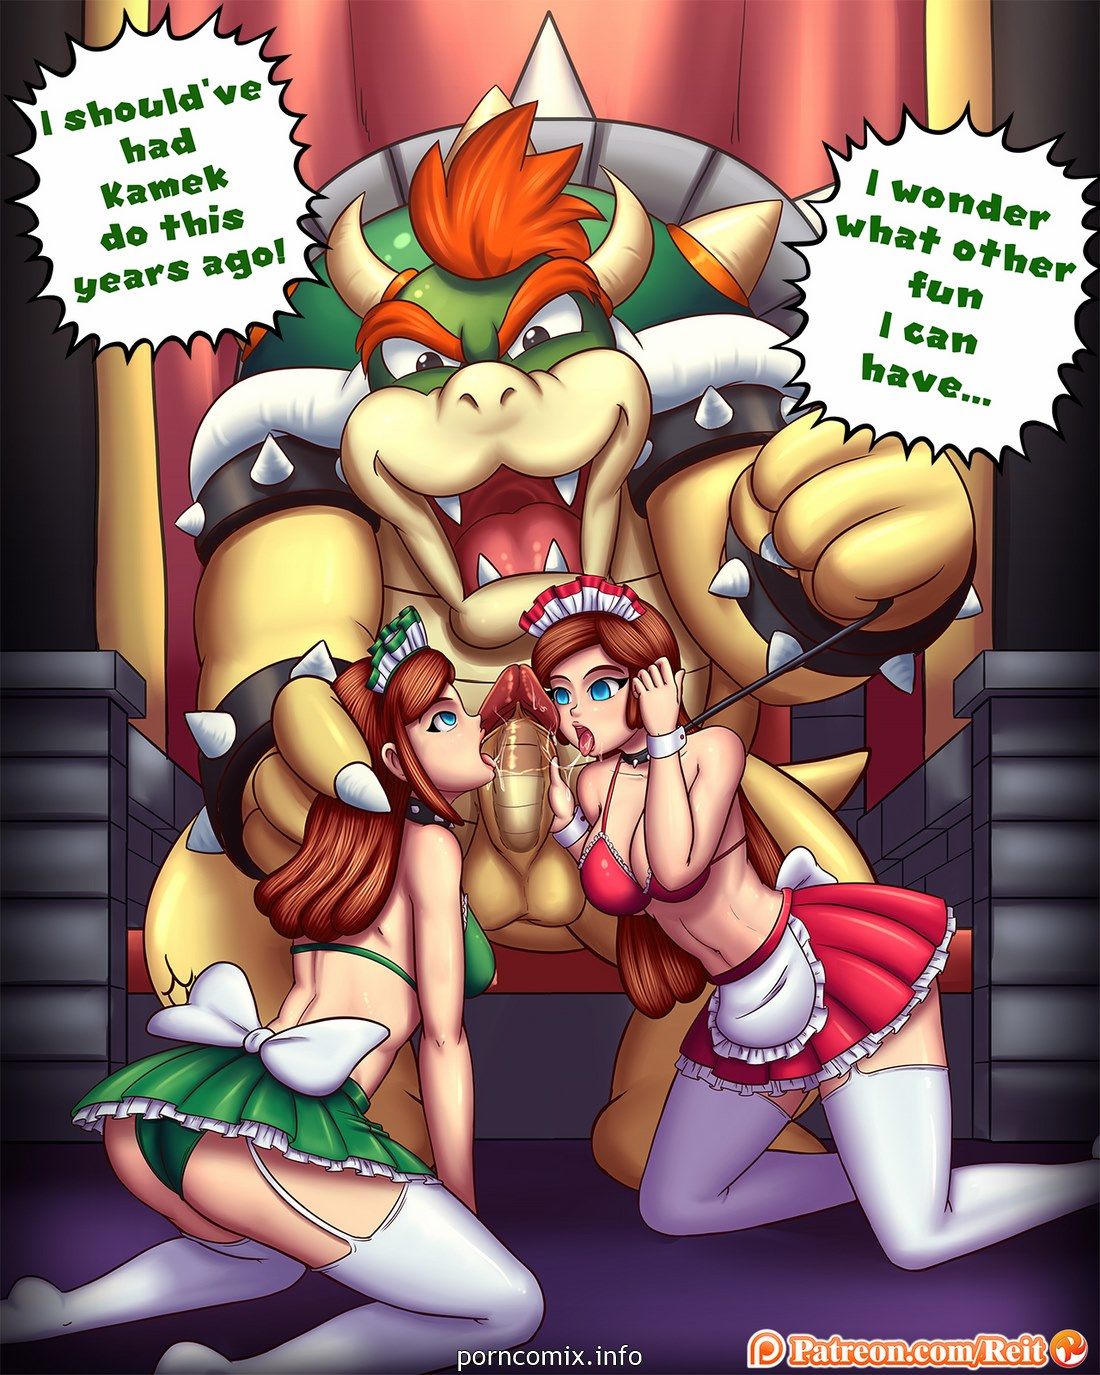 Hentai comic mario, busty redhead teen pictures